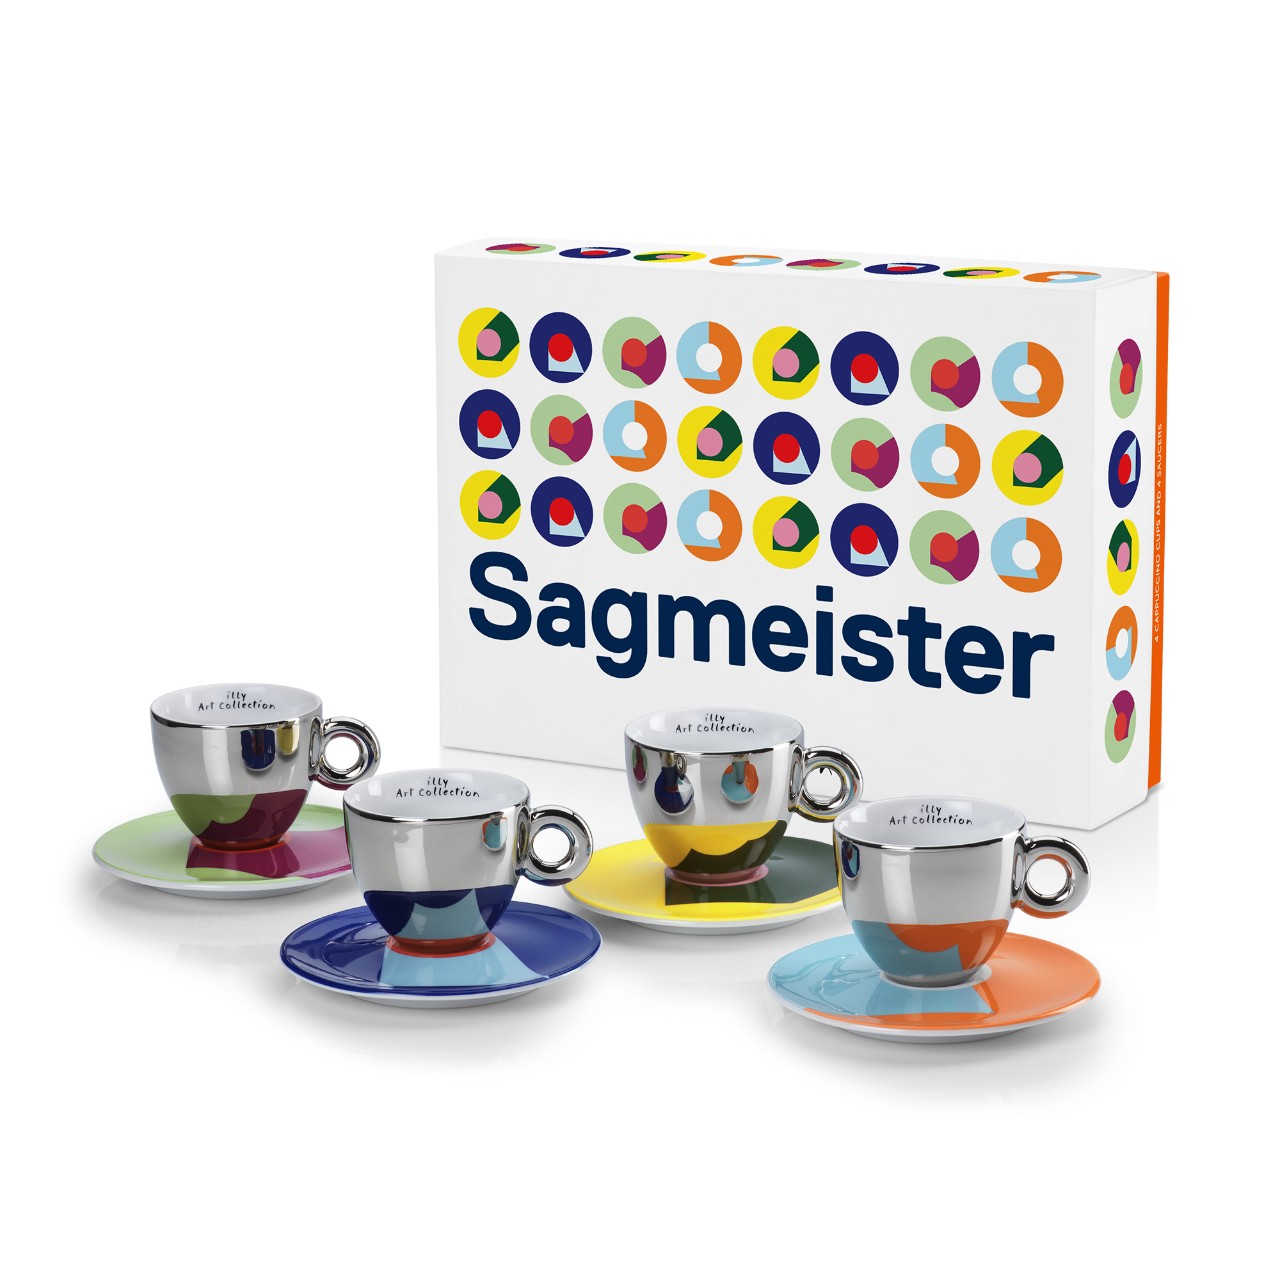 illy Art Collection Stefan Sagmeister - Set of 4 Cappuccino Cups